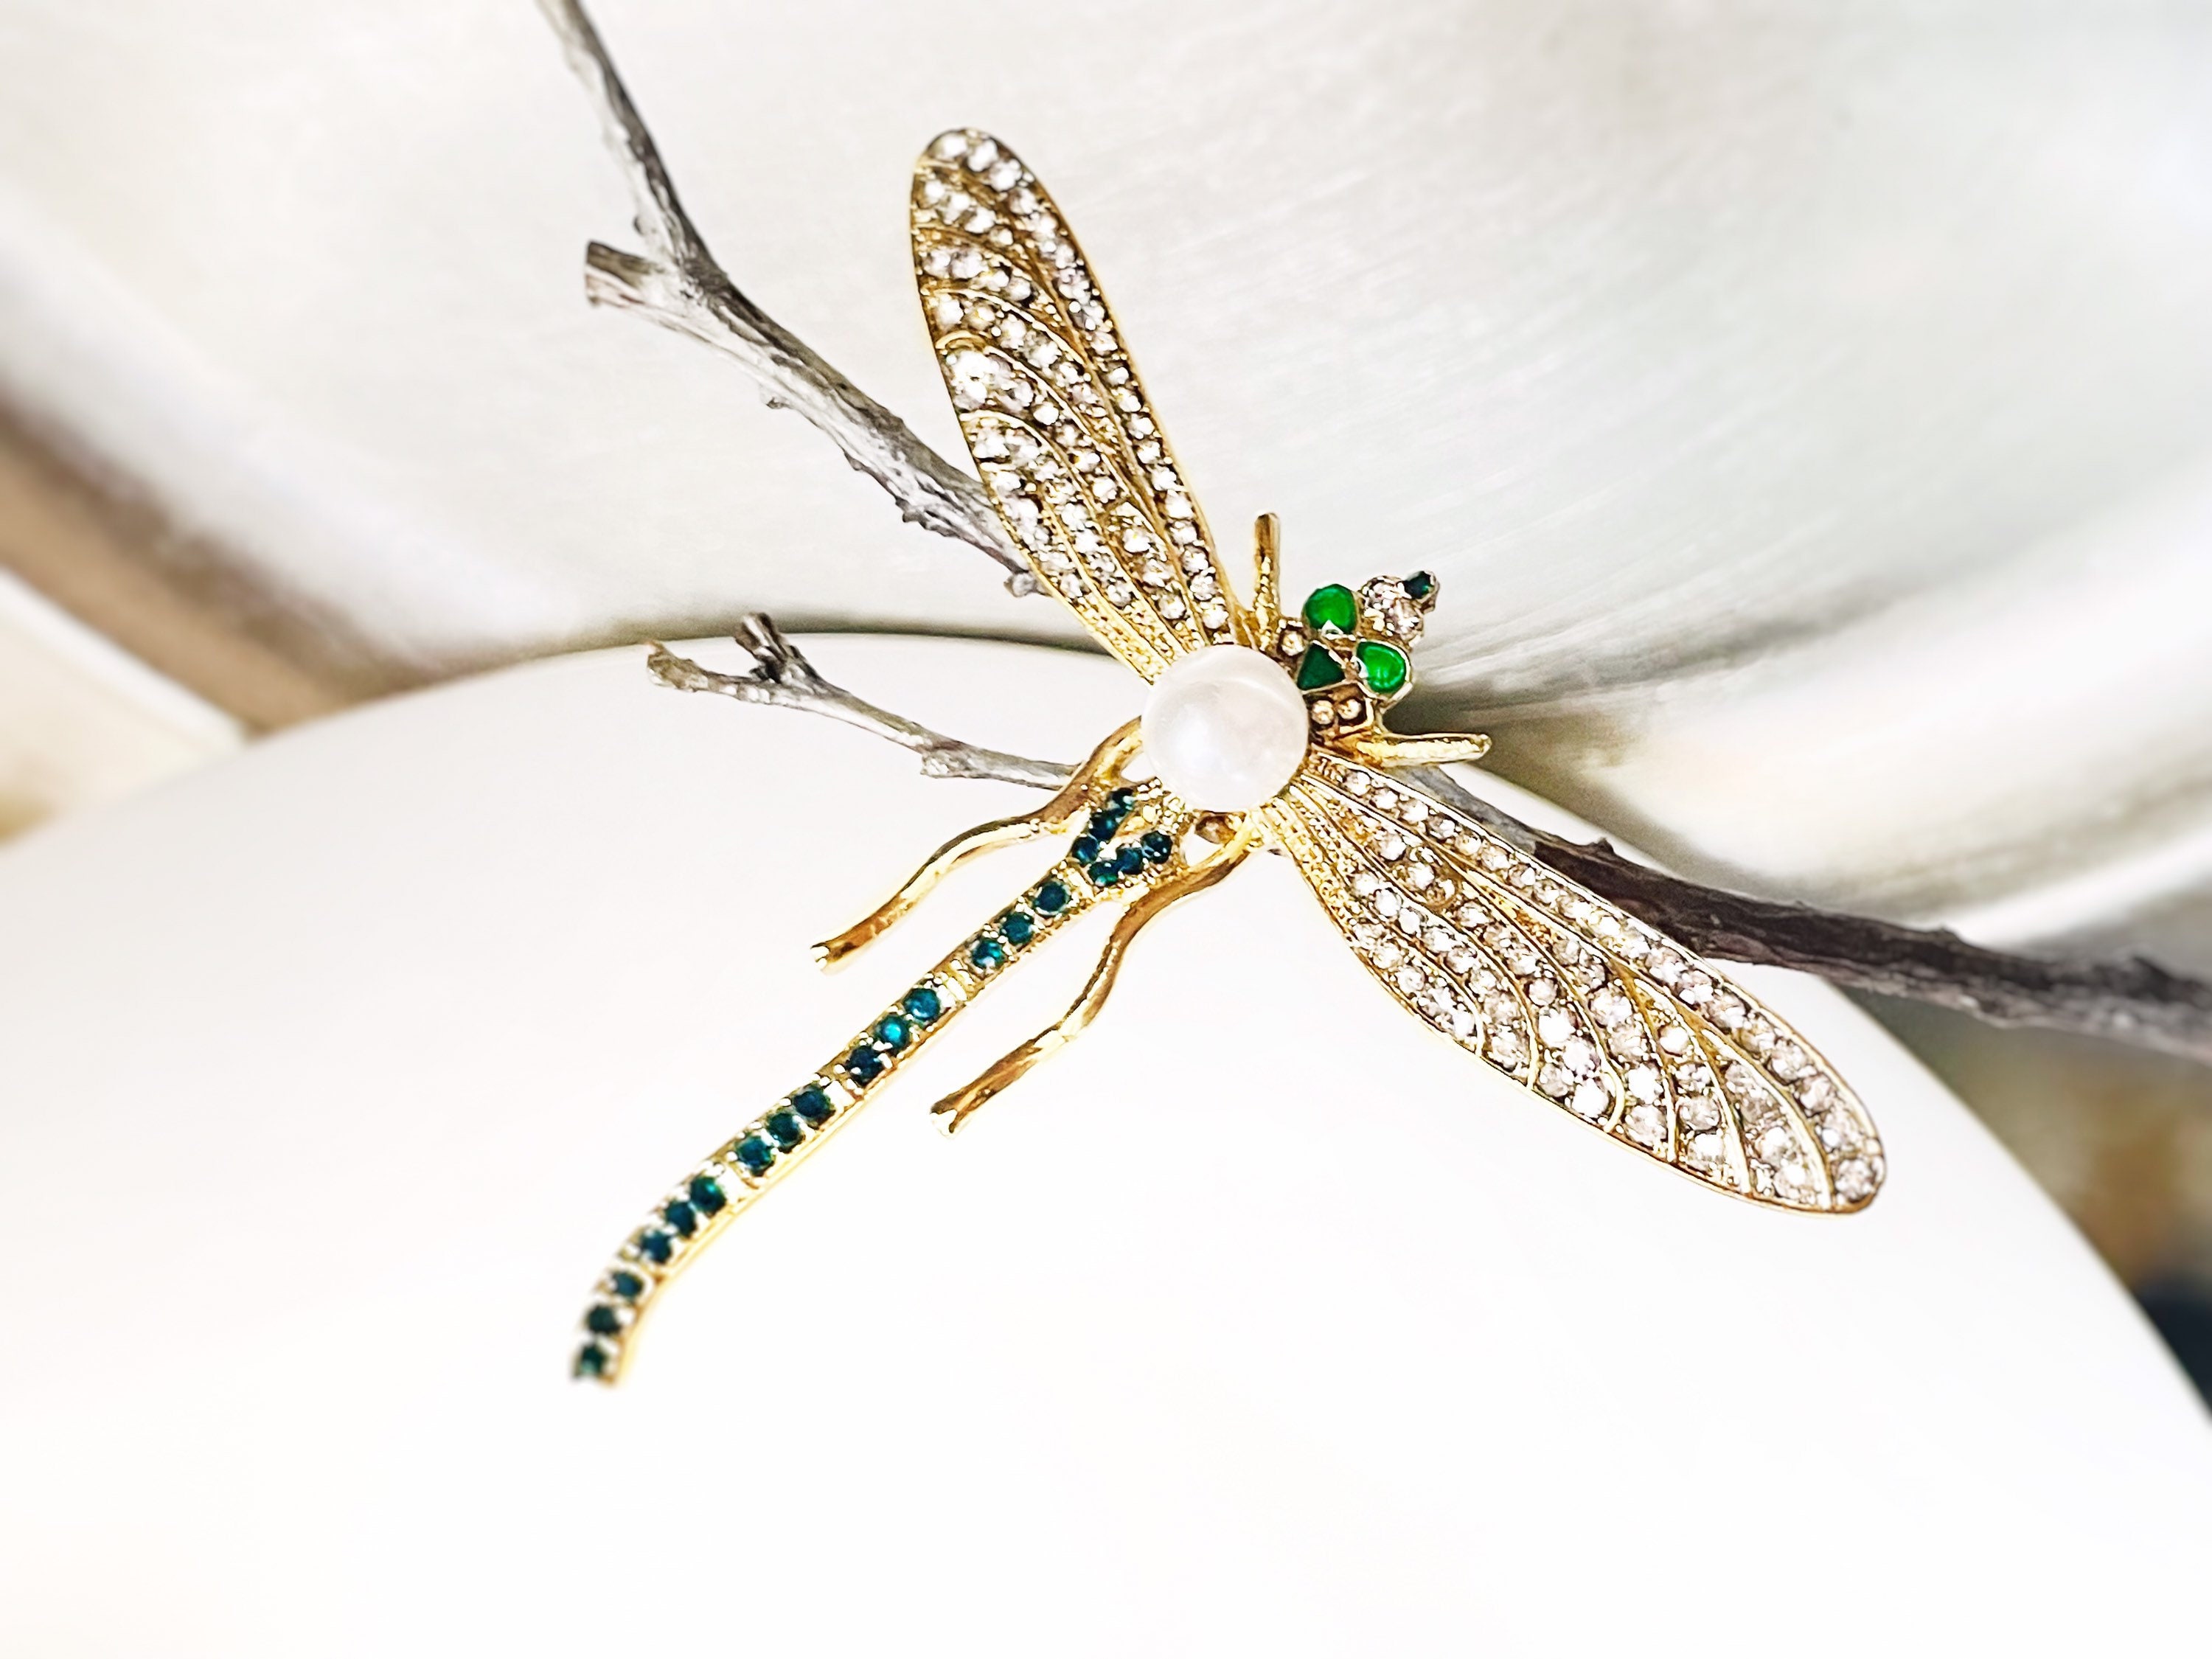 Dragonfly Ring Dish, Dragonfly Gifts, Dragonfly Love Gift, Dragonfly Dish,  Gift for Couples, Gift for Bride, Dragonfly Decor, Dragonfly 